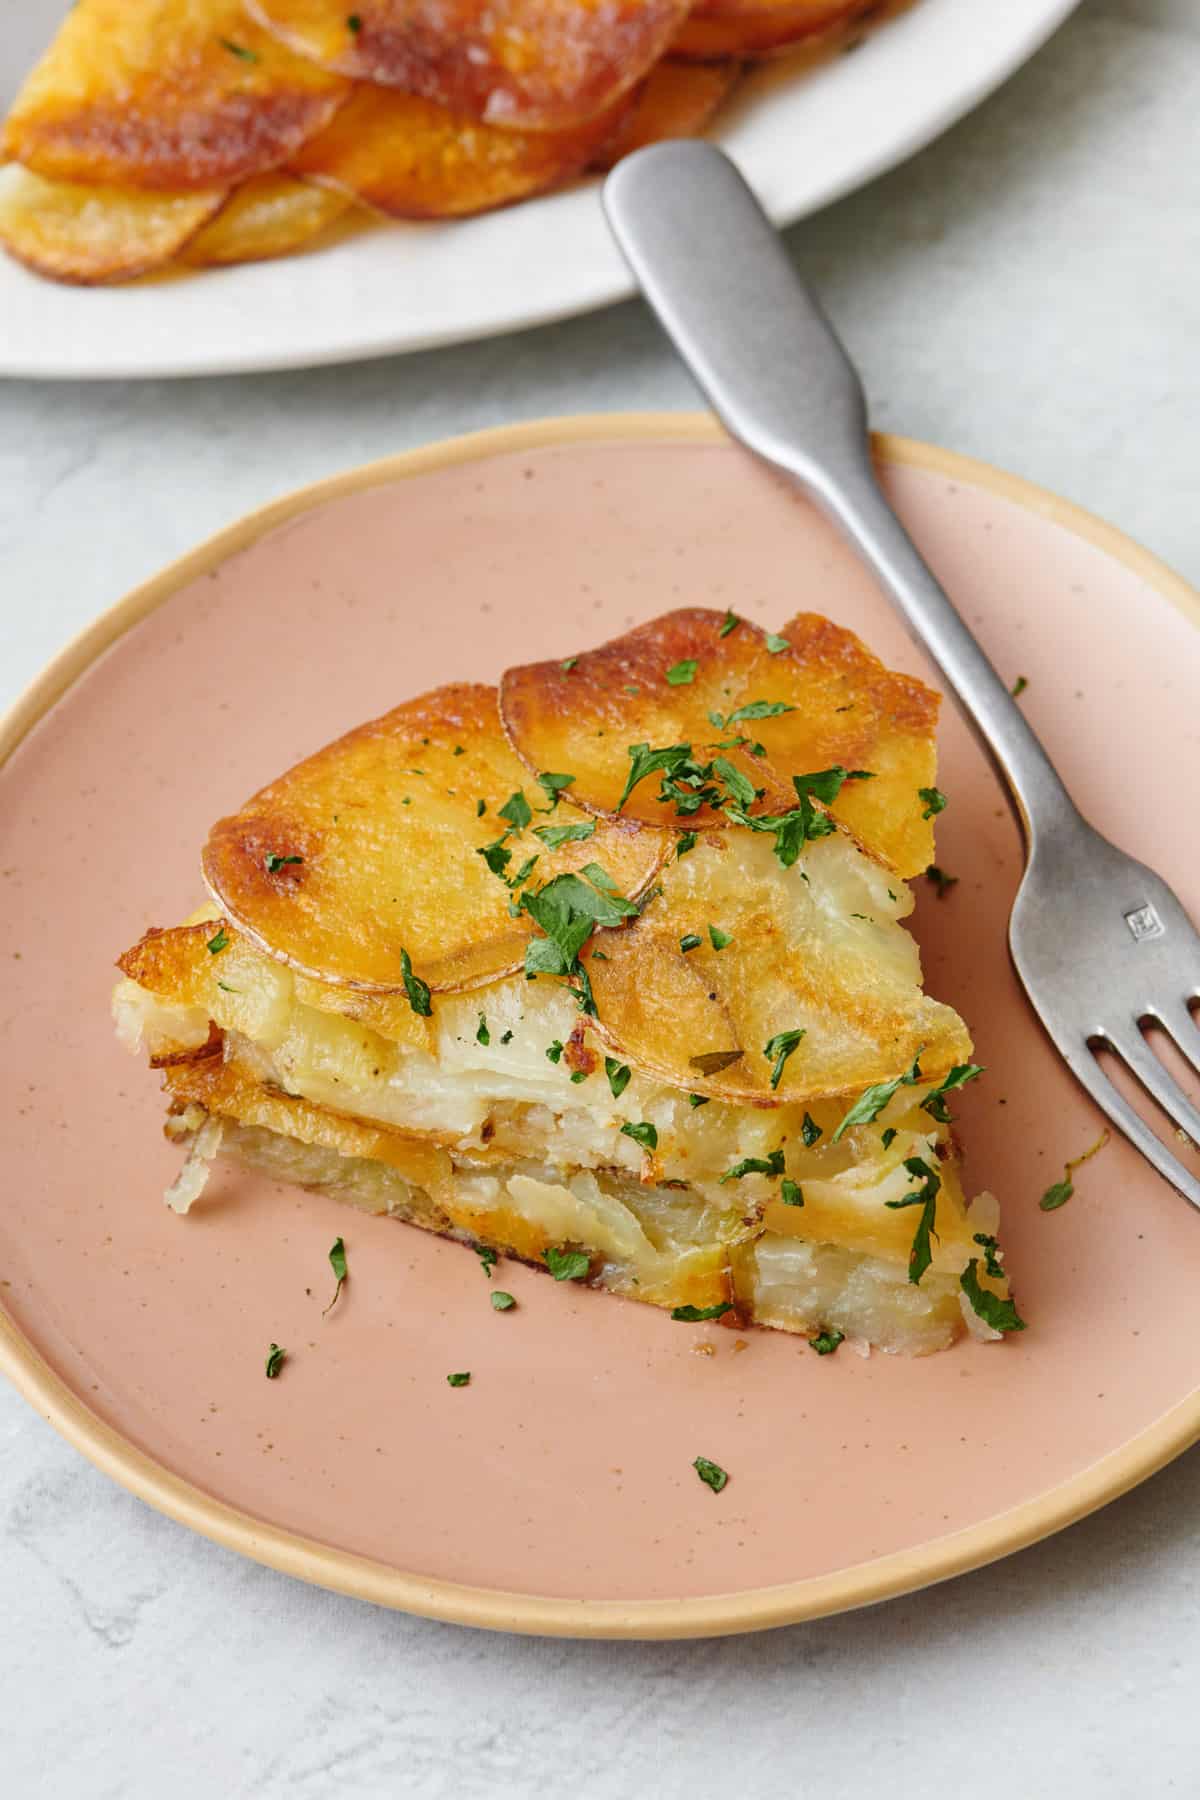 Serving of potato galette on a plate with fork.